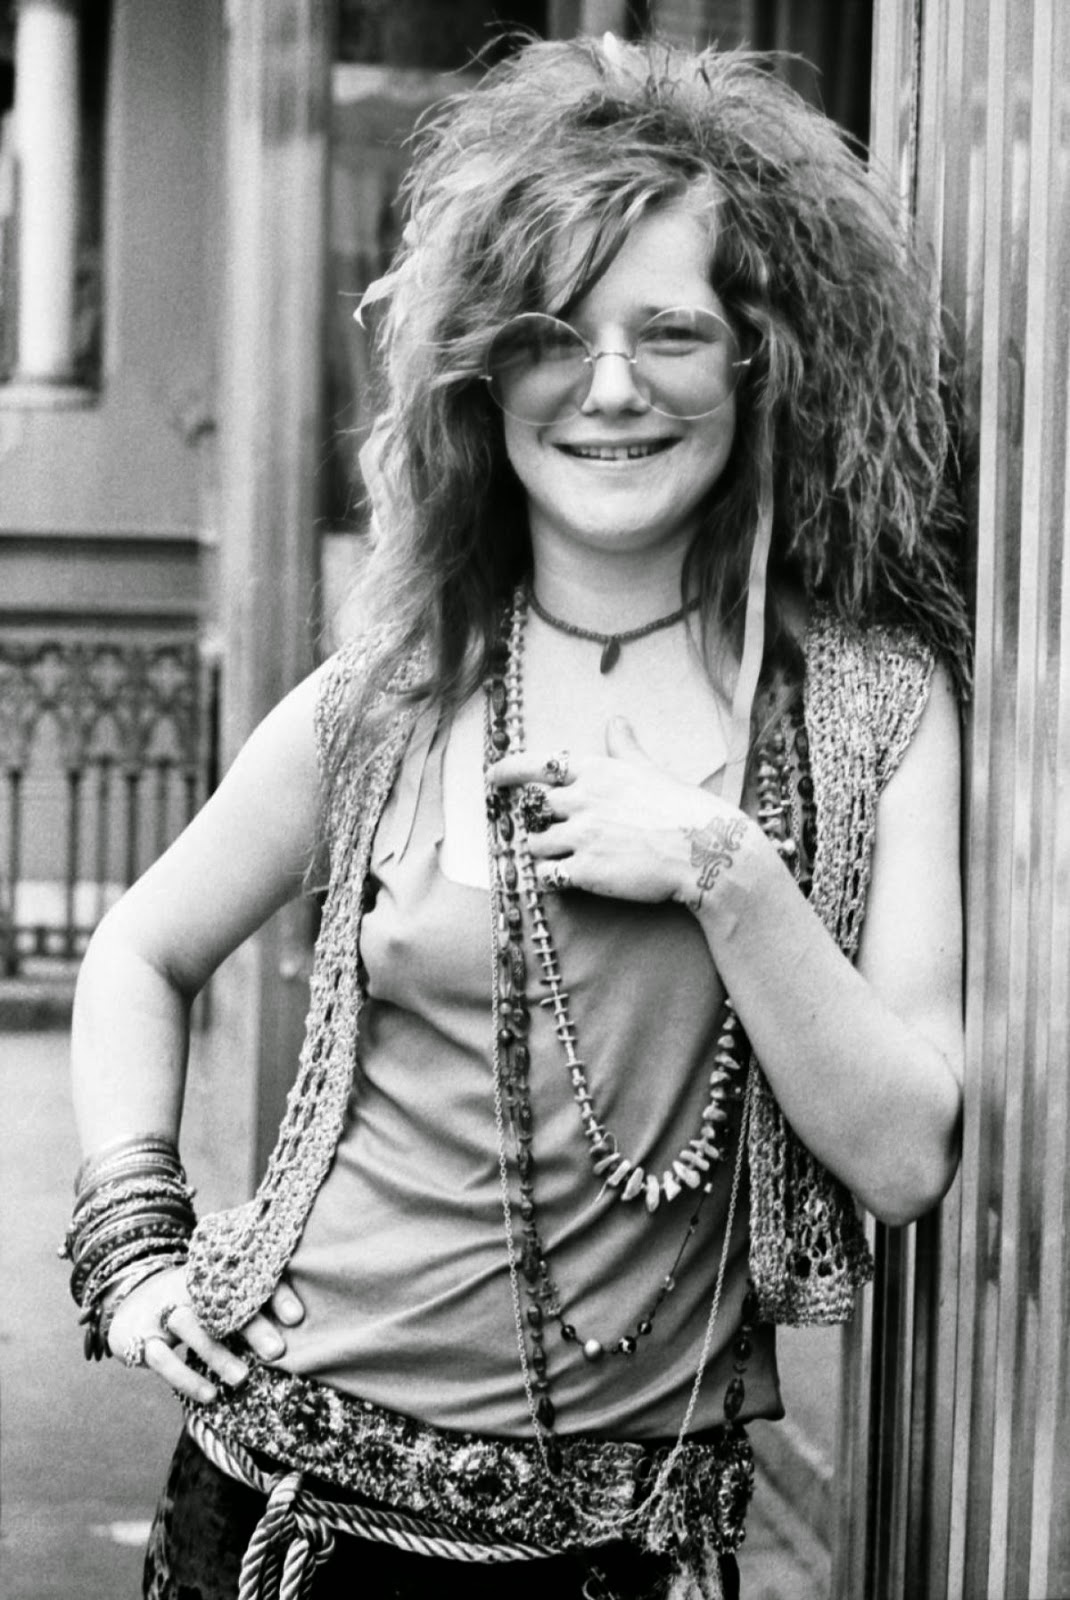 Joplin Gets Her Hollywood Star | The Spokesman-Review